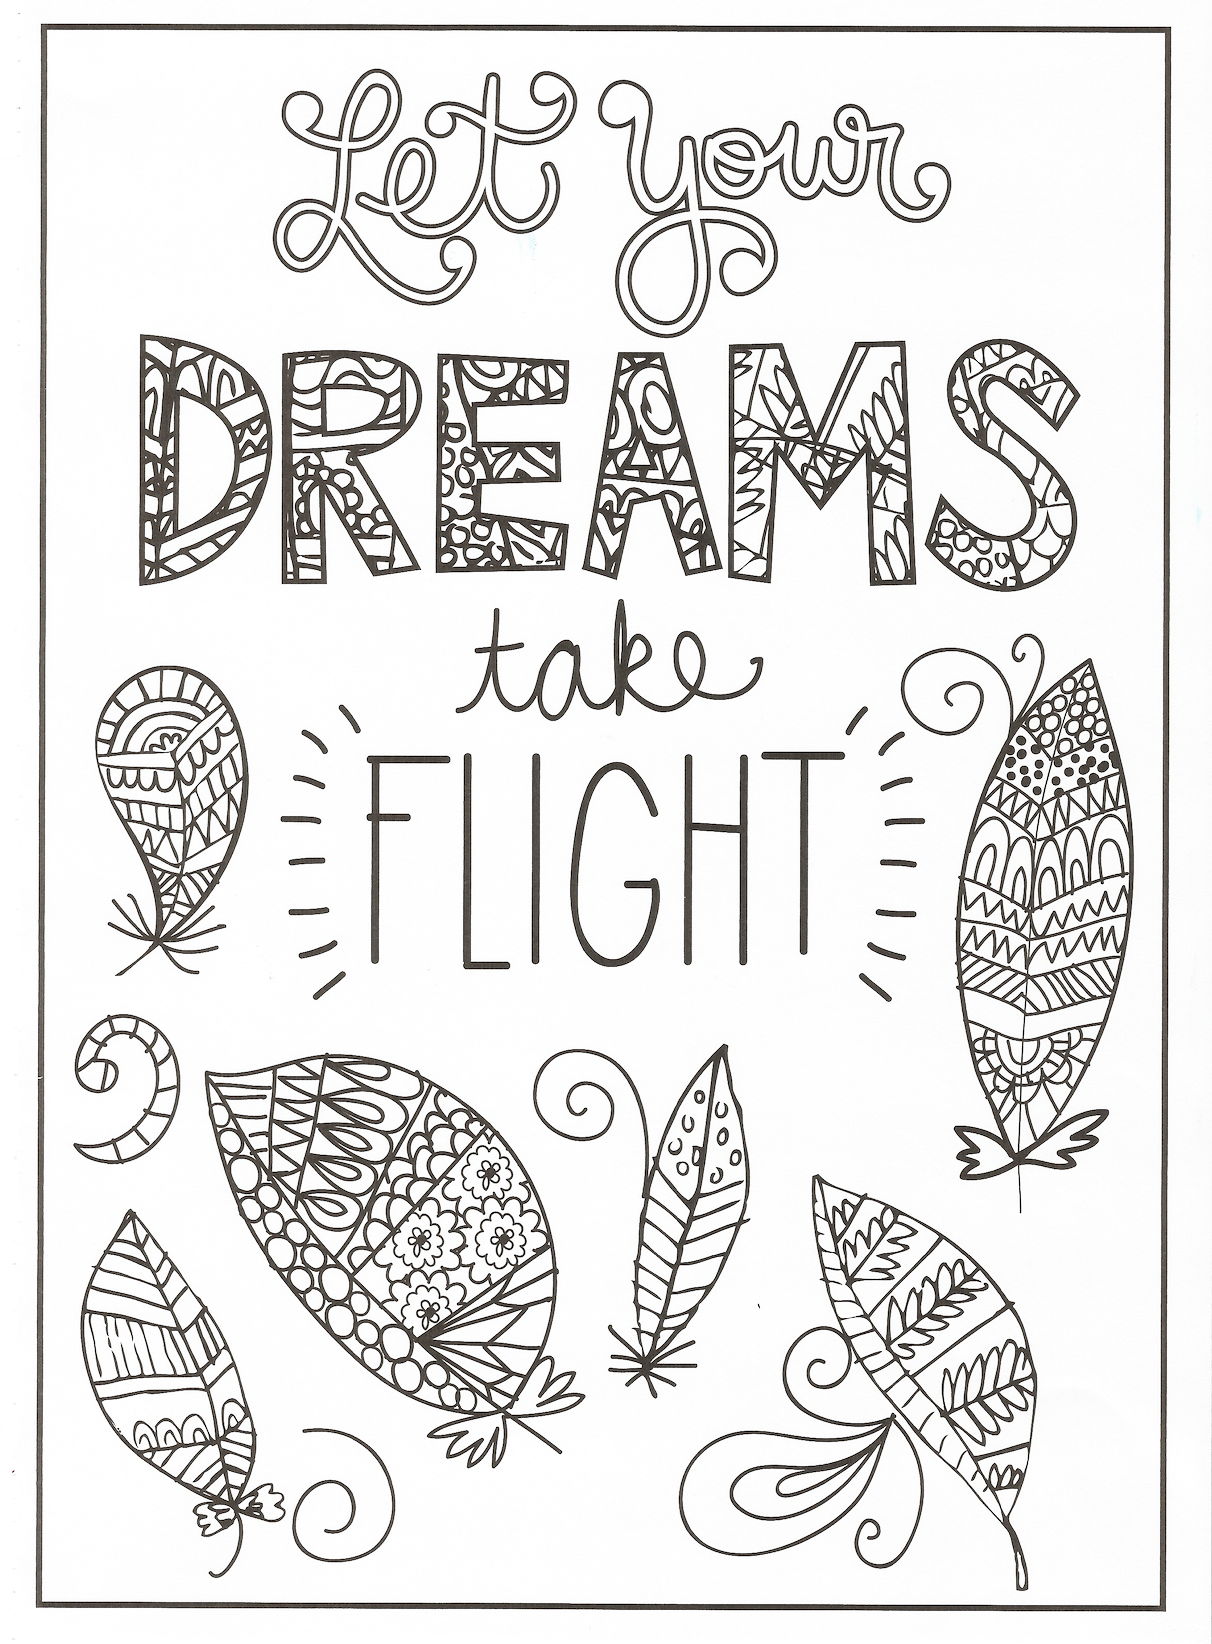 Quote Coloring Pages for Adults and Teens - Best Coloring Pages